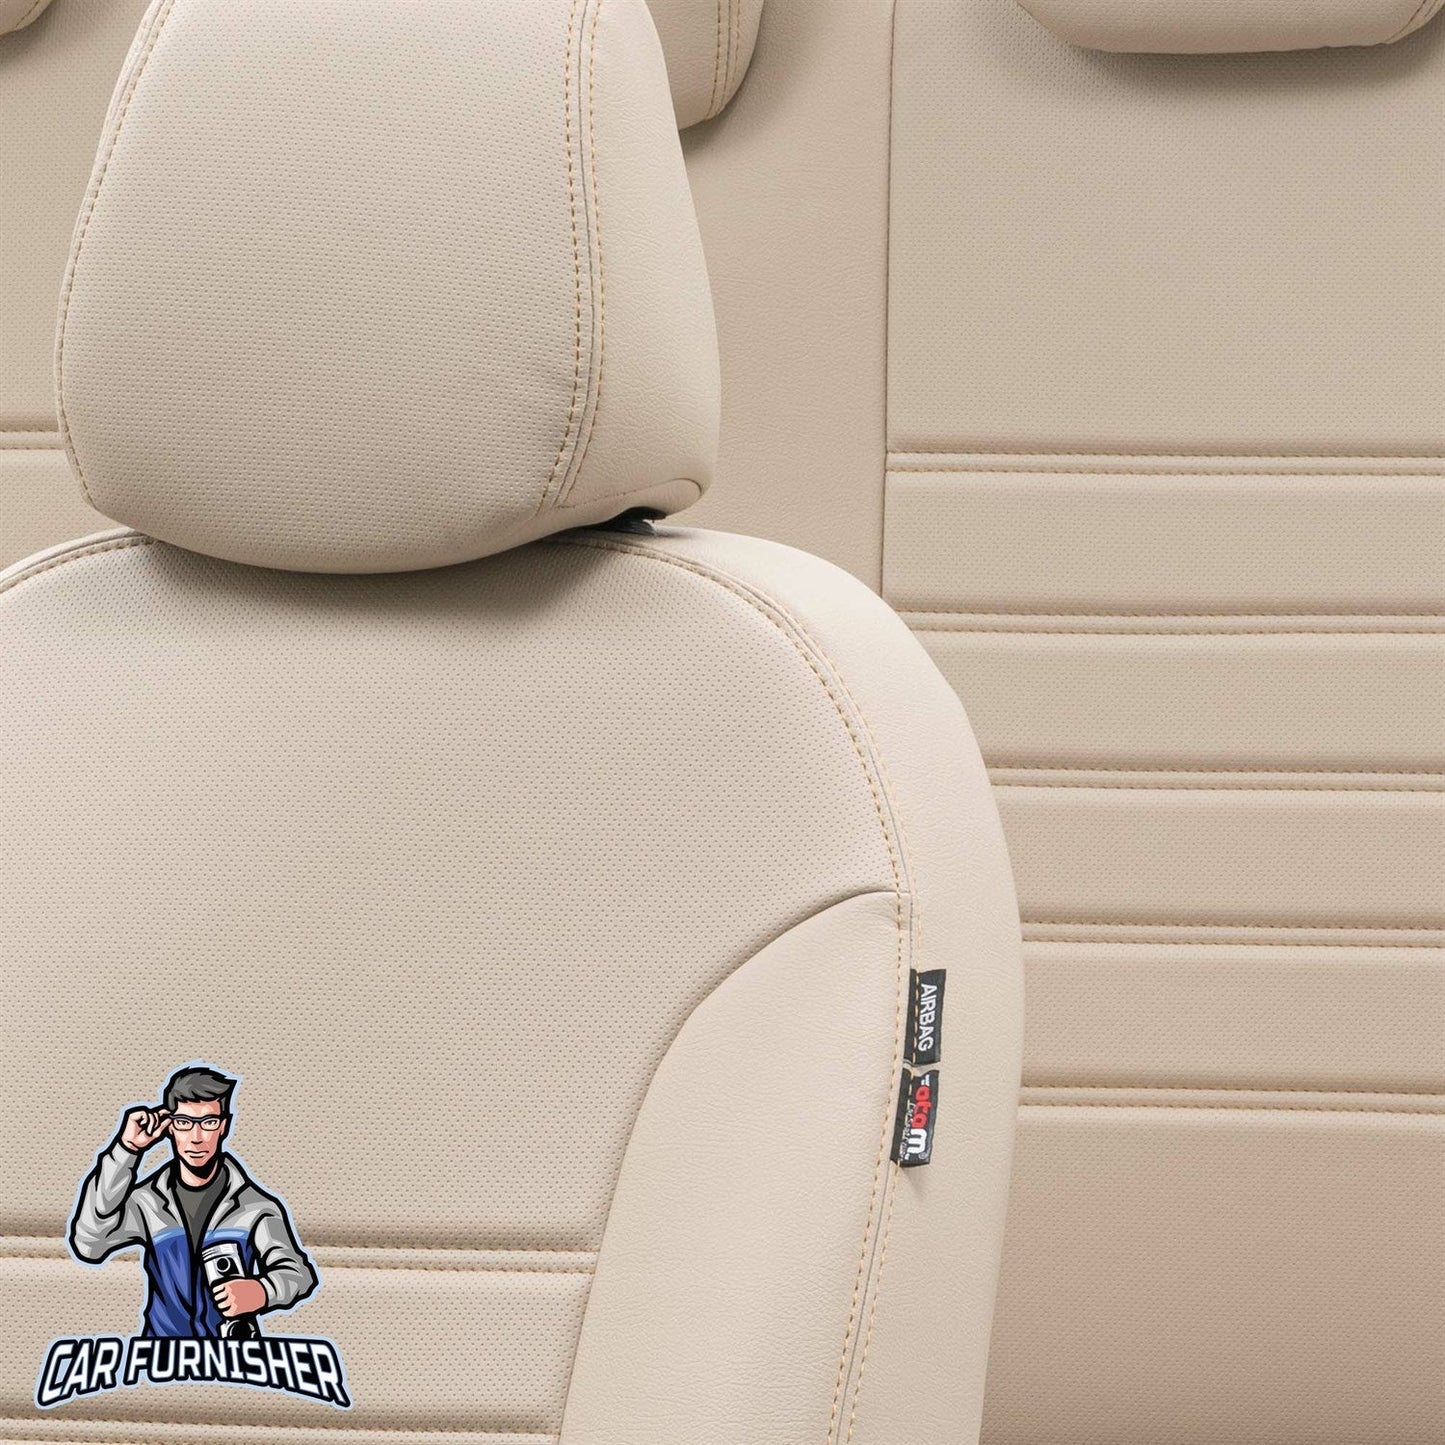 Volvo S90 Seat Cover Istanbul Leather Design Beige Leather